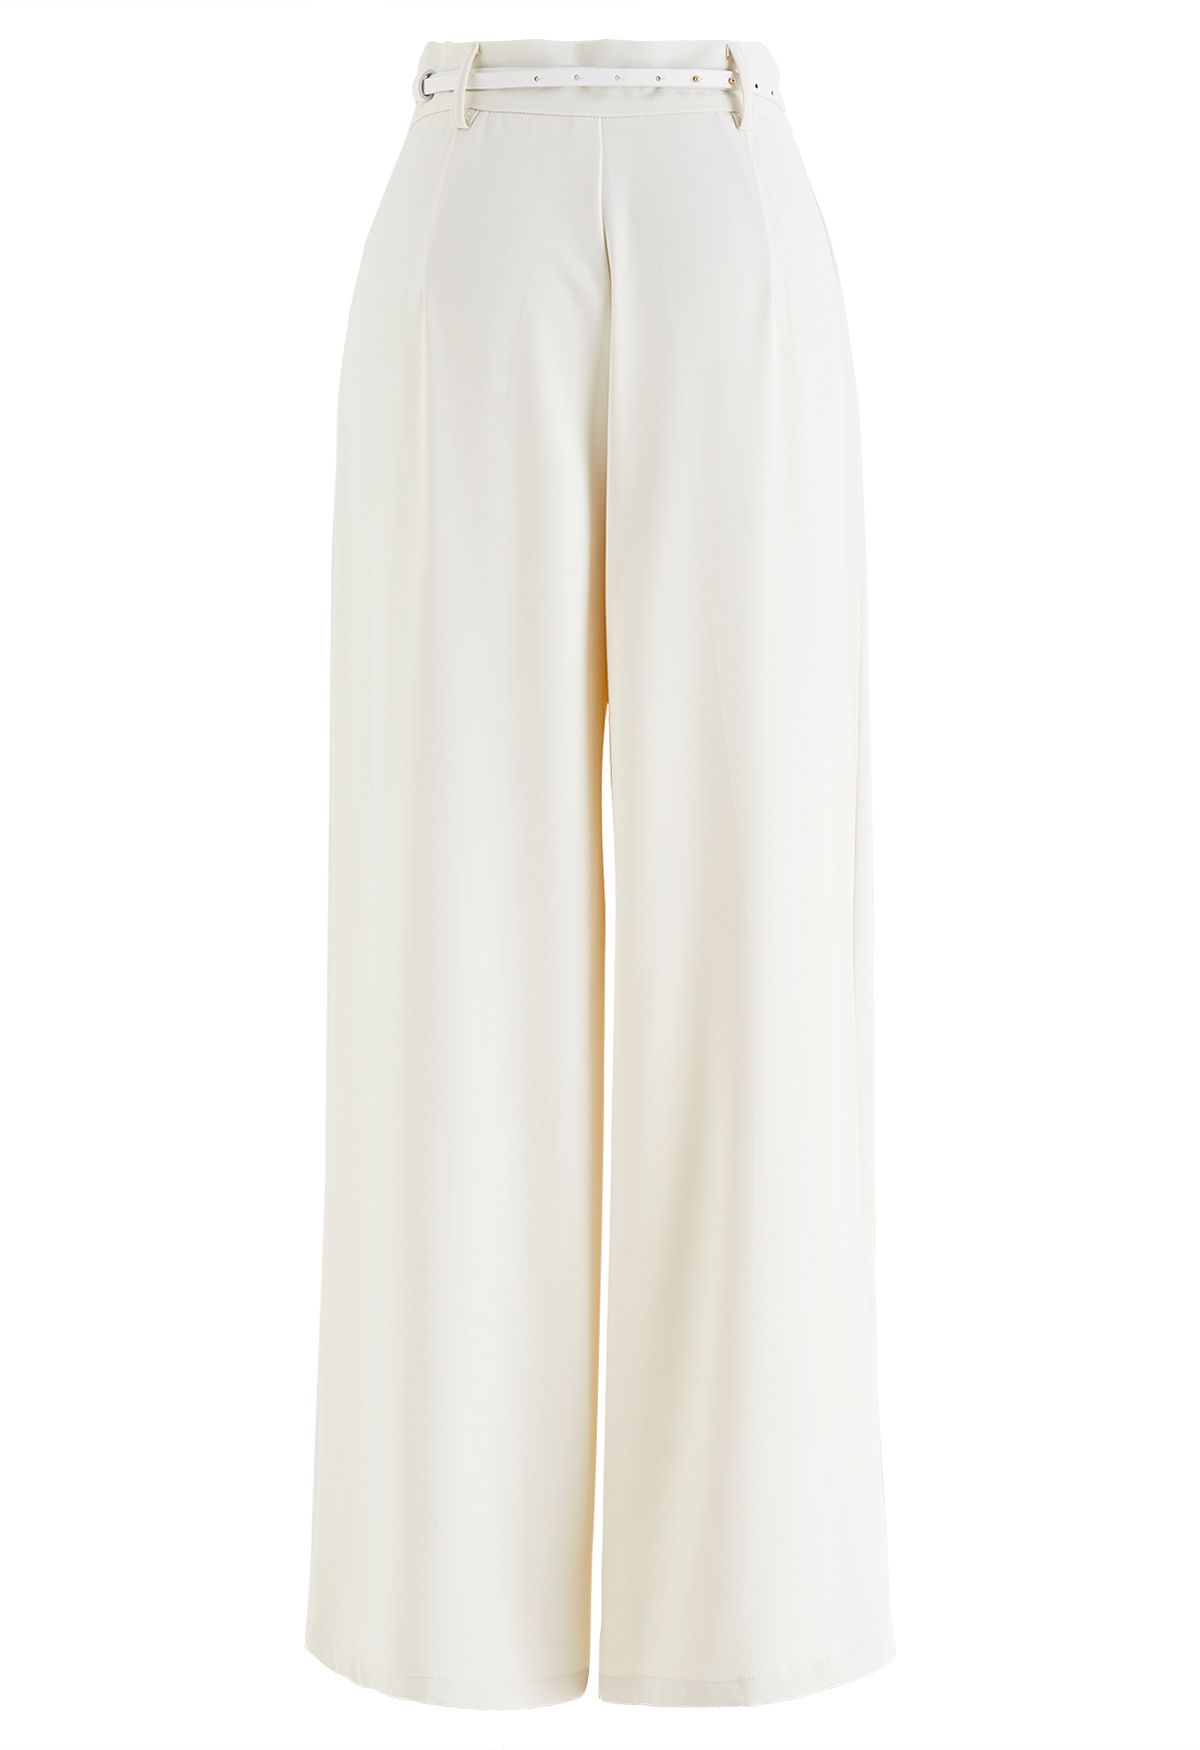 Pleat Front Wide-Leg Belted Pants in Ivory - Retro, Indie and Unique ...